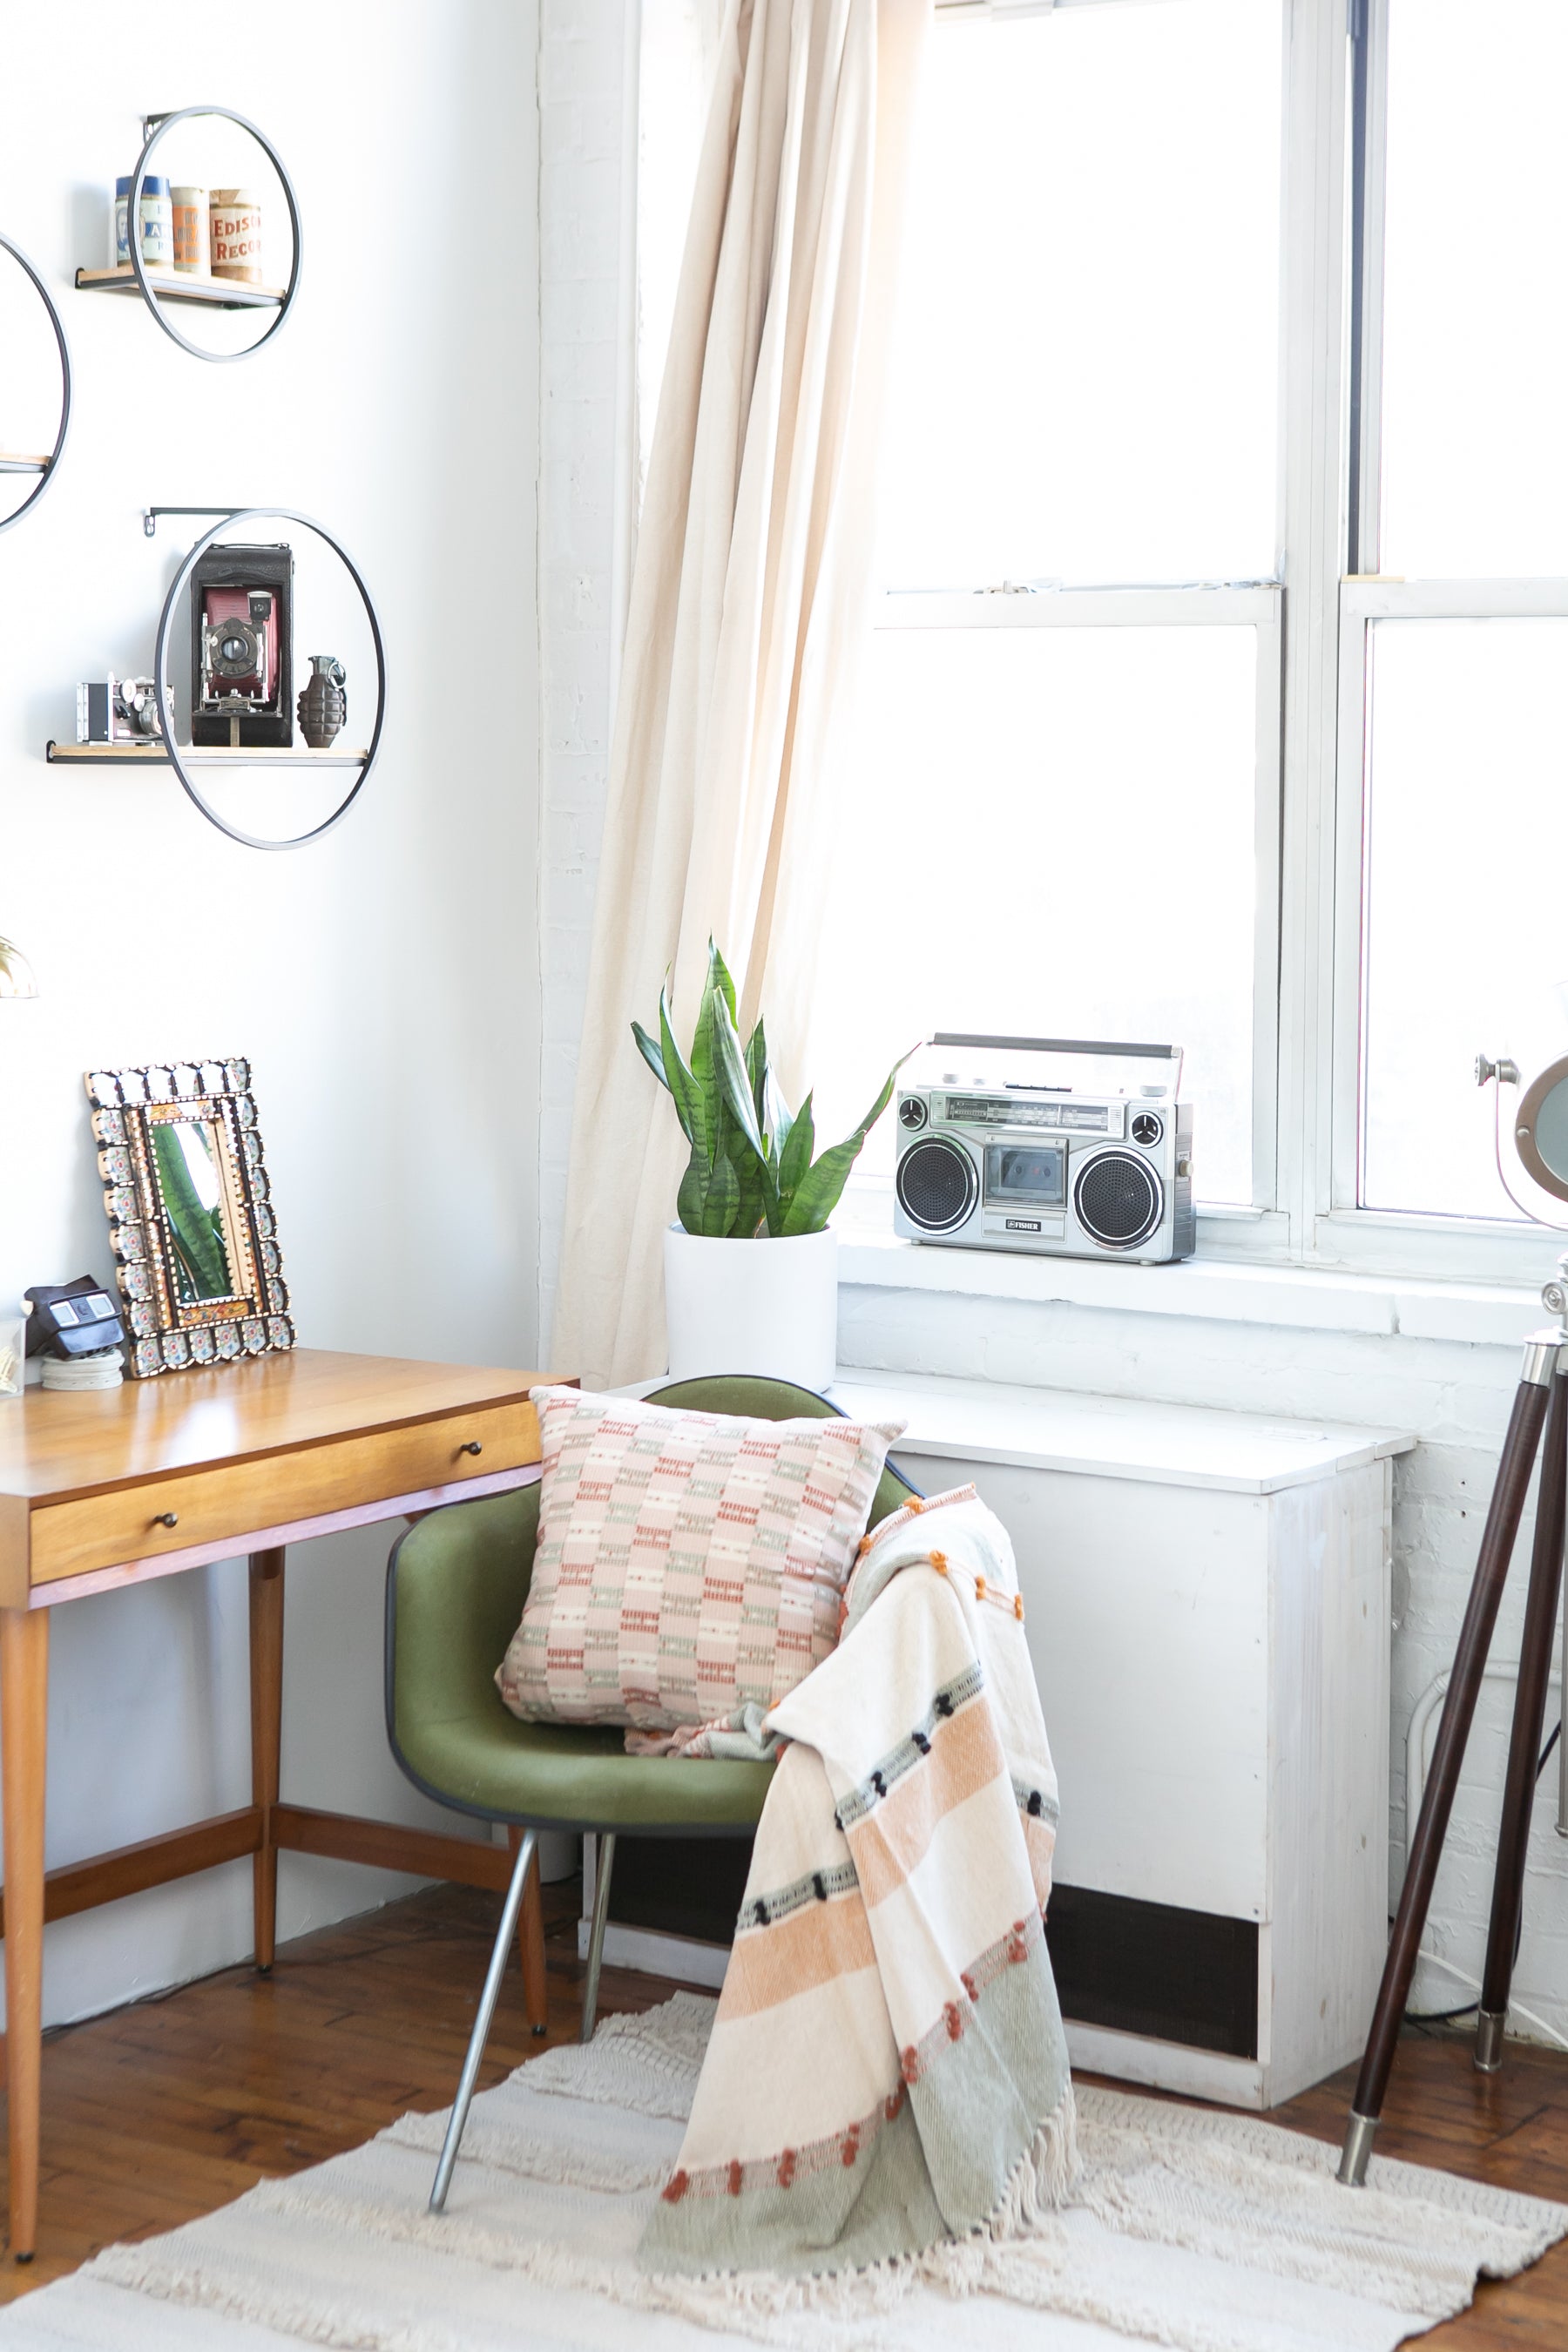 How to Create a Workspace at Home - Design School Sunday